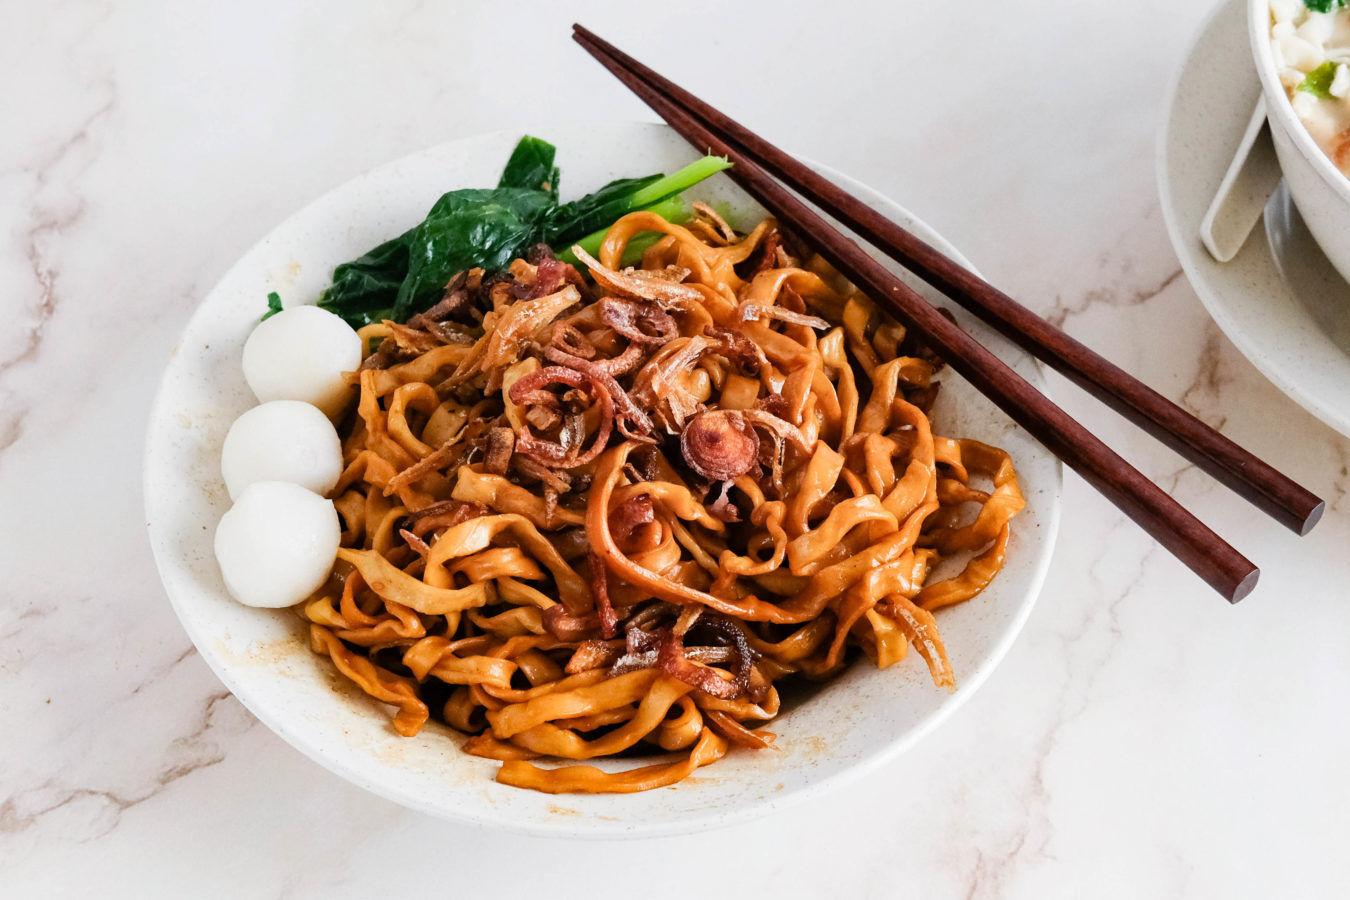 Craving for pan mee? Here’s where you can find pork-free pan mee in KL